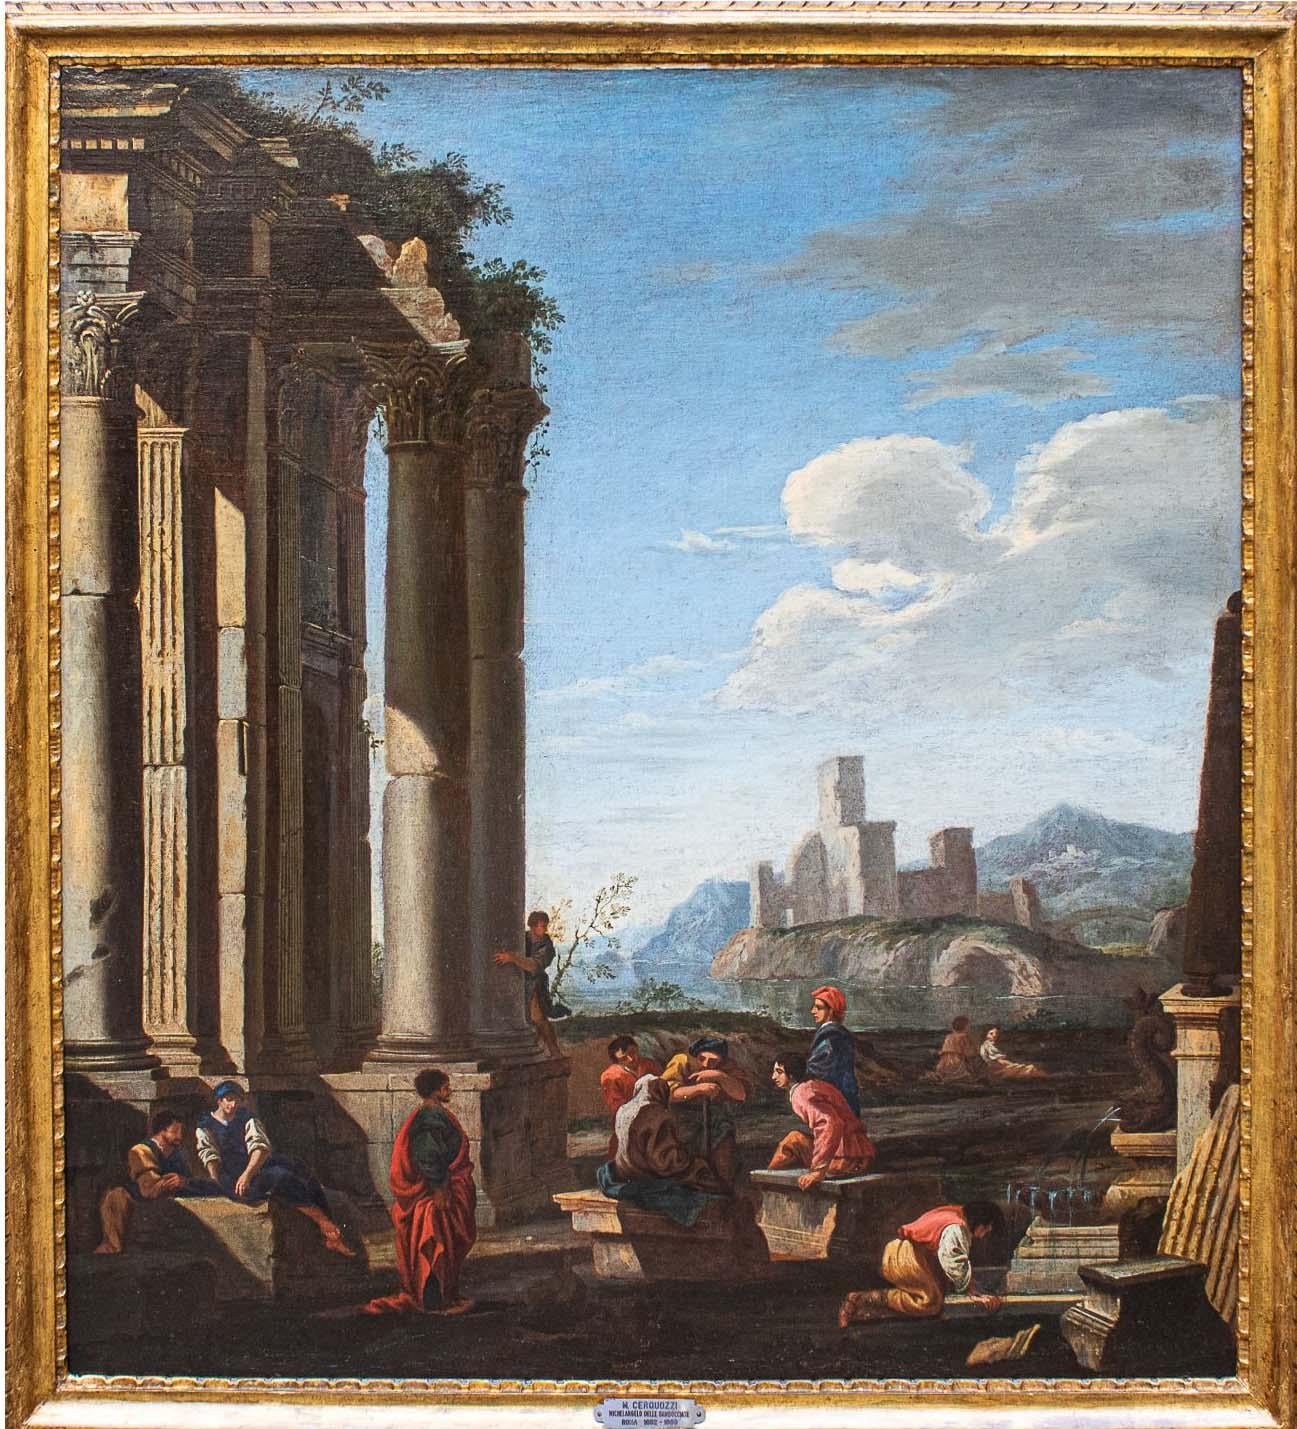 Italian Domenico Roberti '1642-1707' Whims with Classical Ruins Paintings Oil on Canvas 